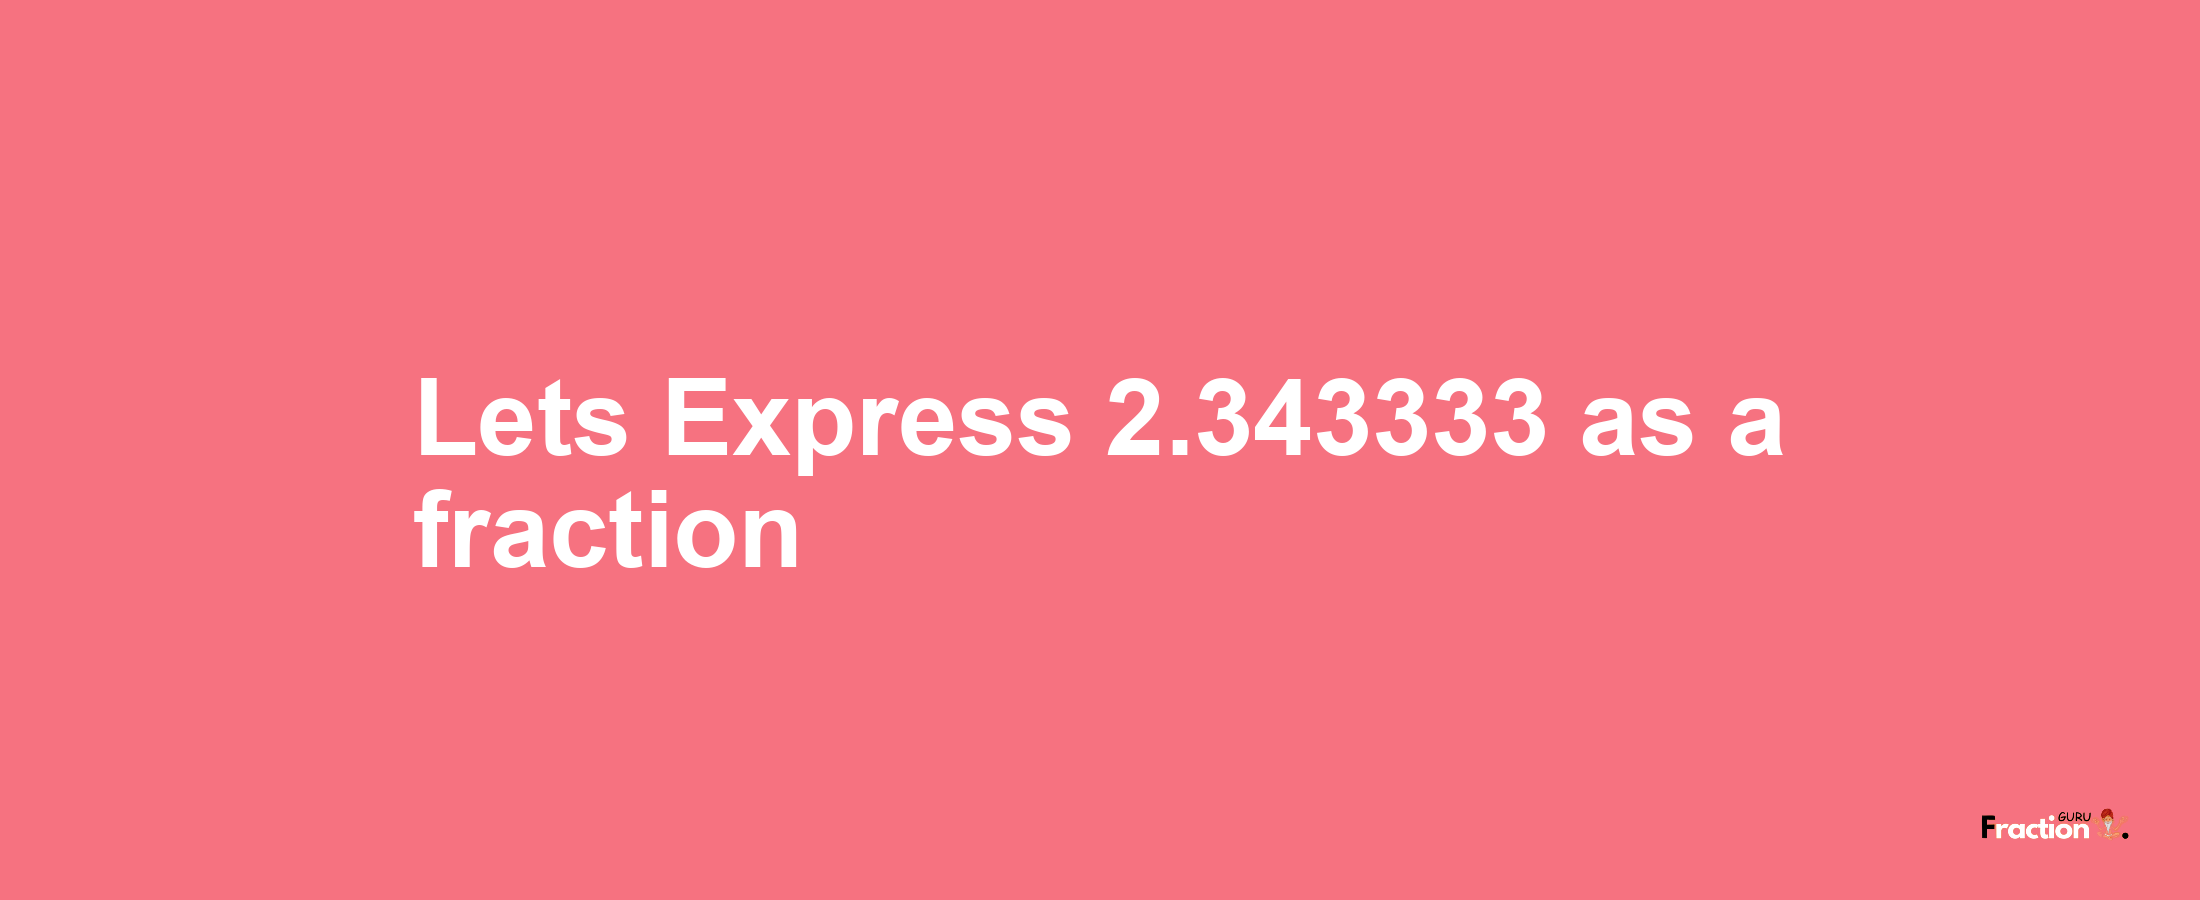 Lets Express 2.343333 as afraction